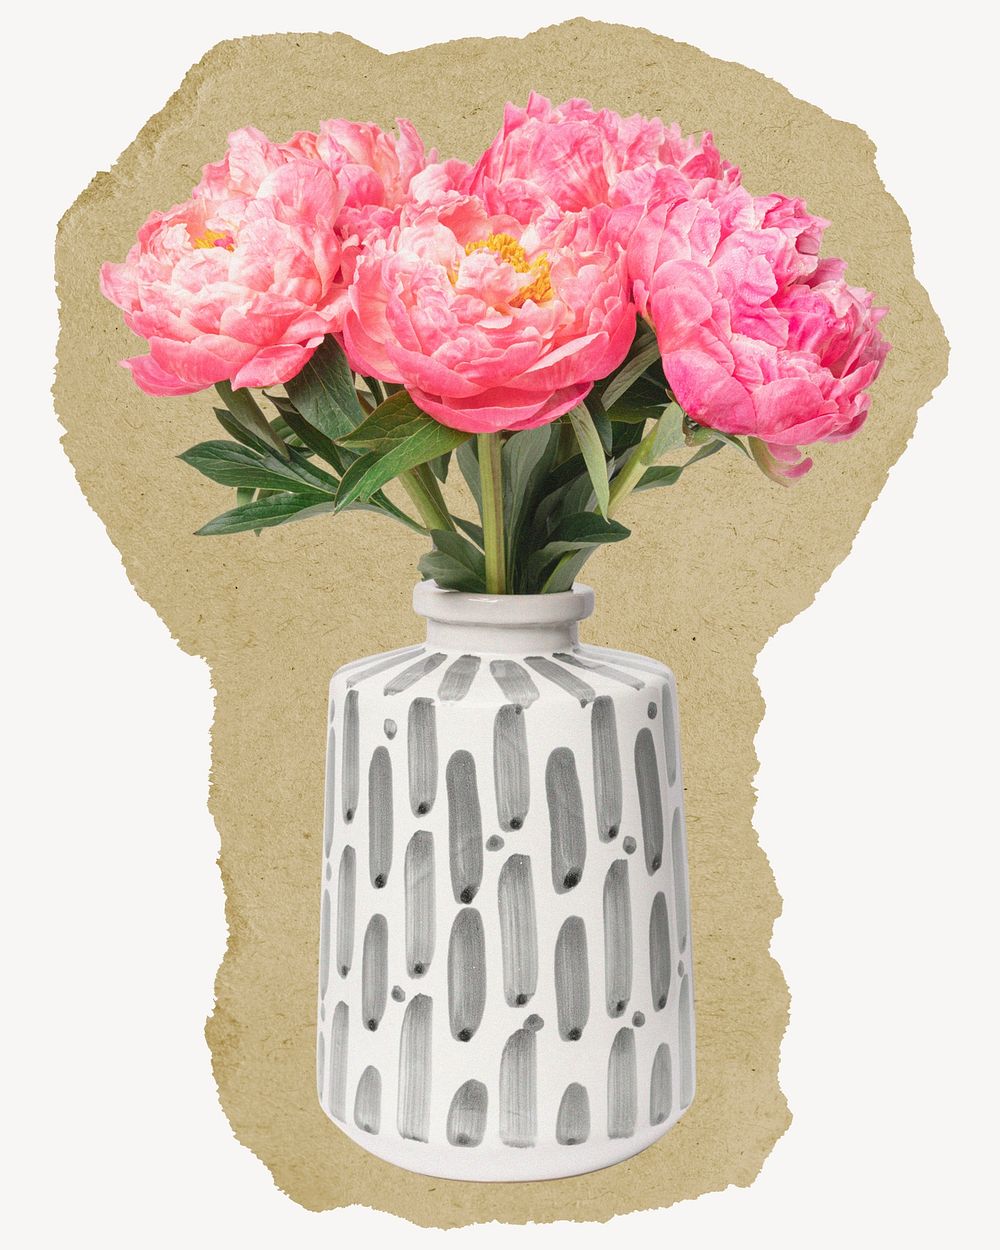 Flower vase, ripped paper collage element